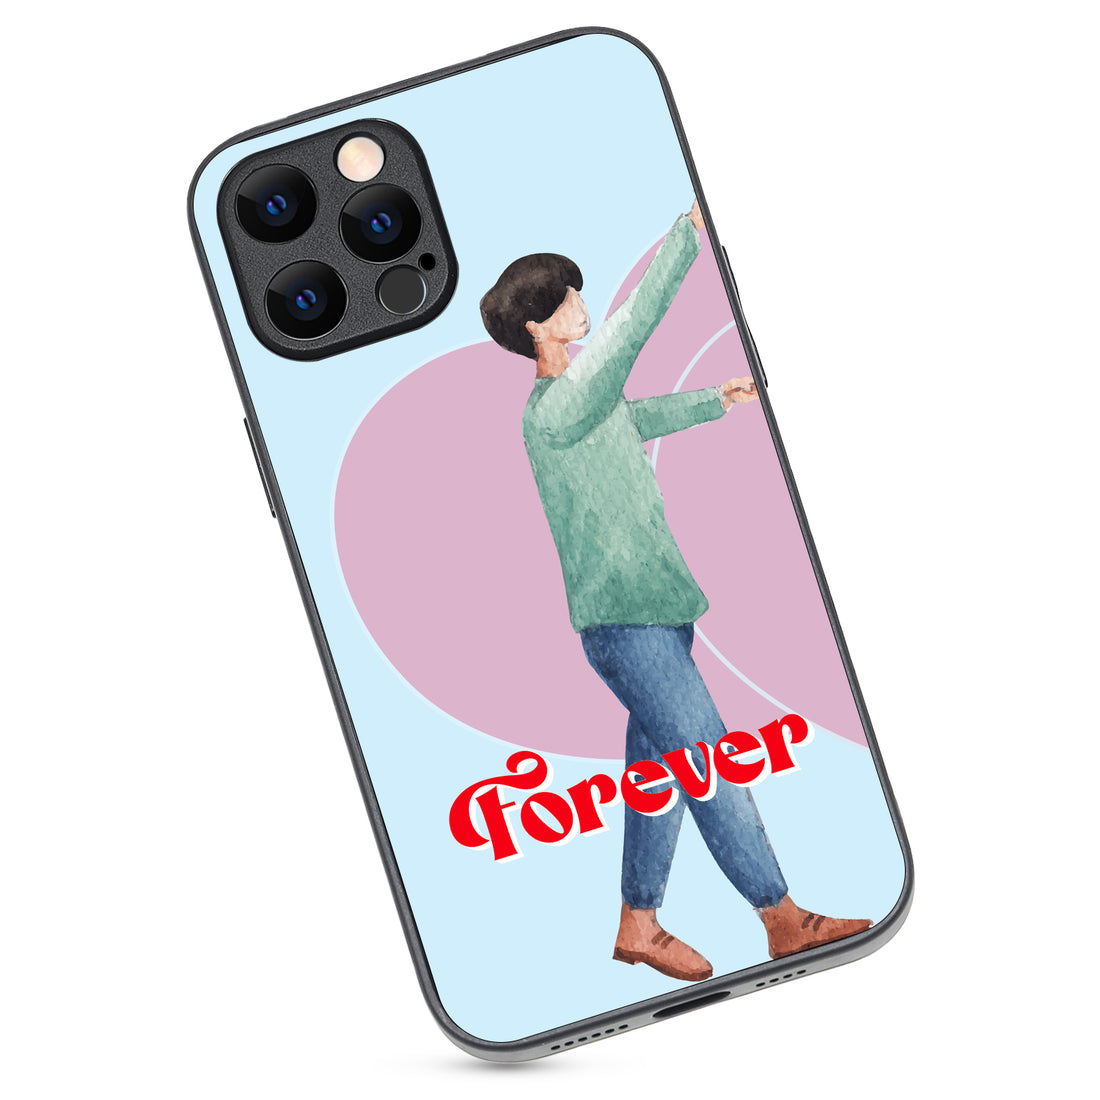 Forever Love Boy Couple iPhone 12 Pro Max Case